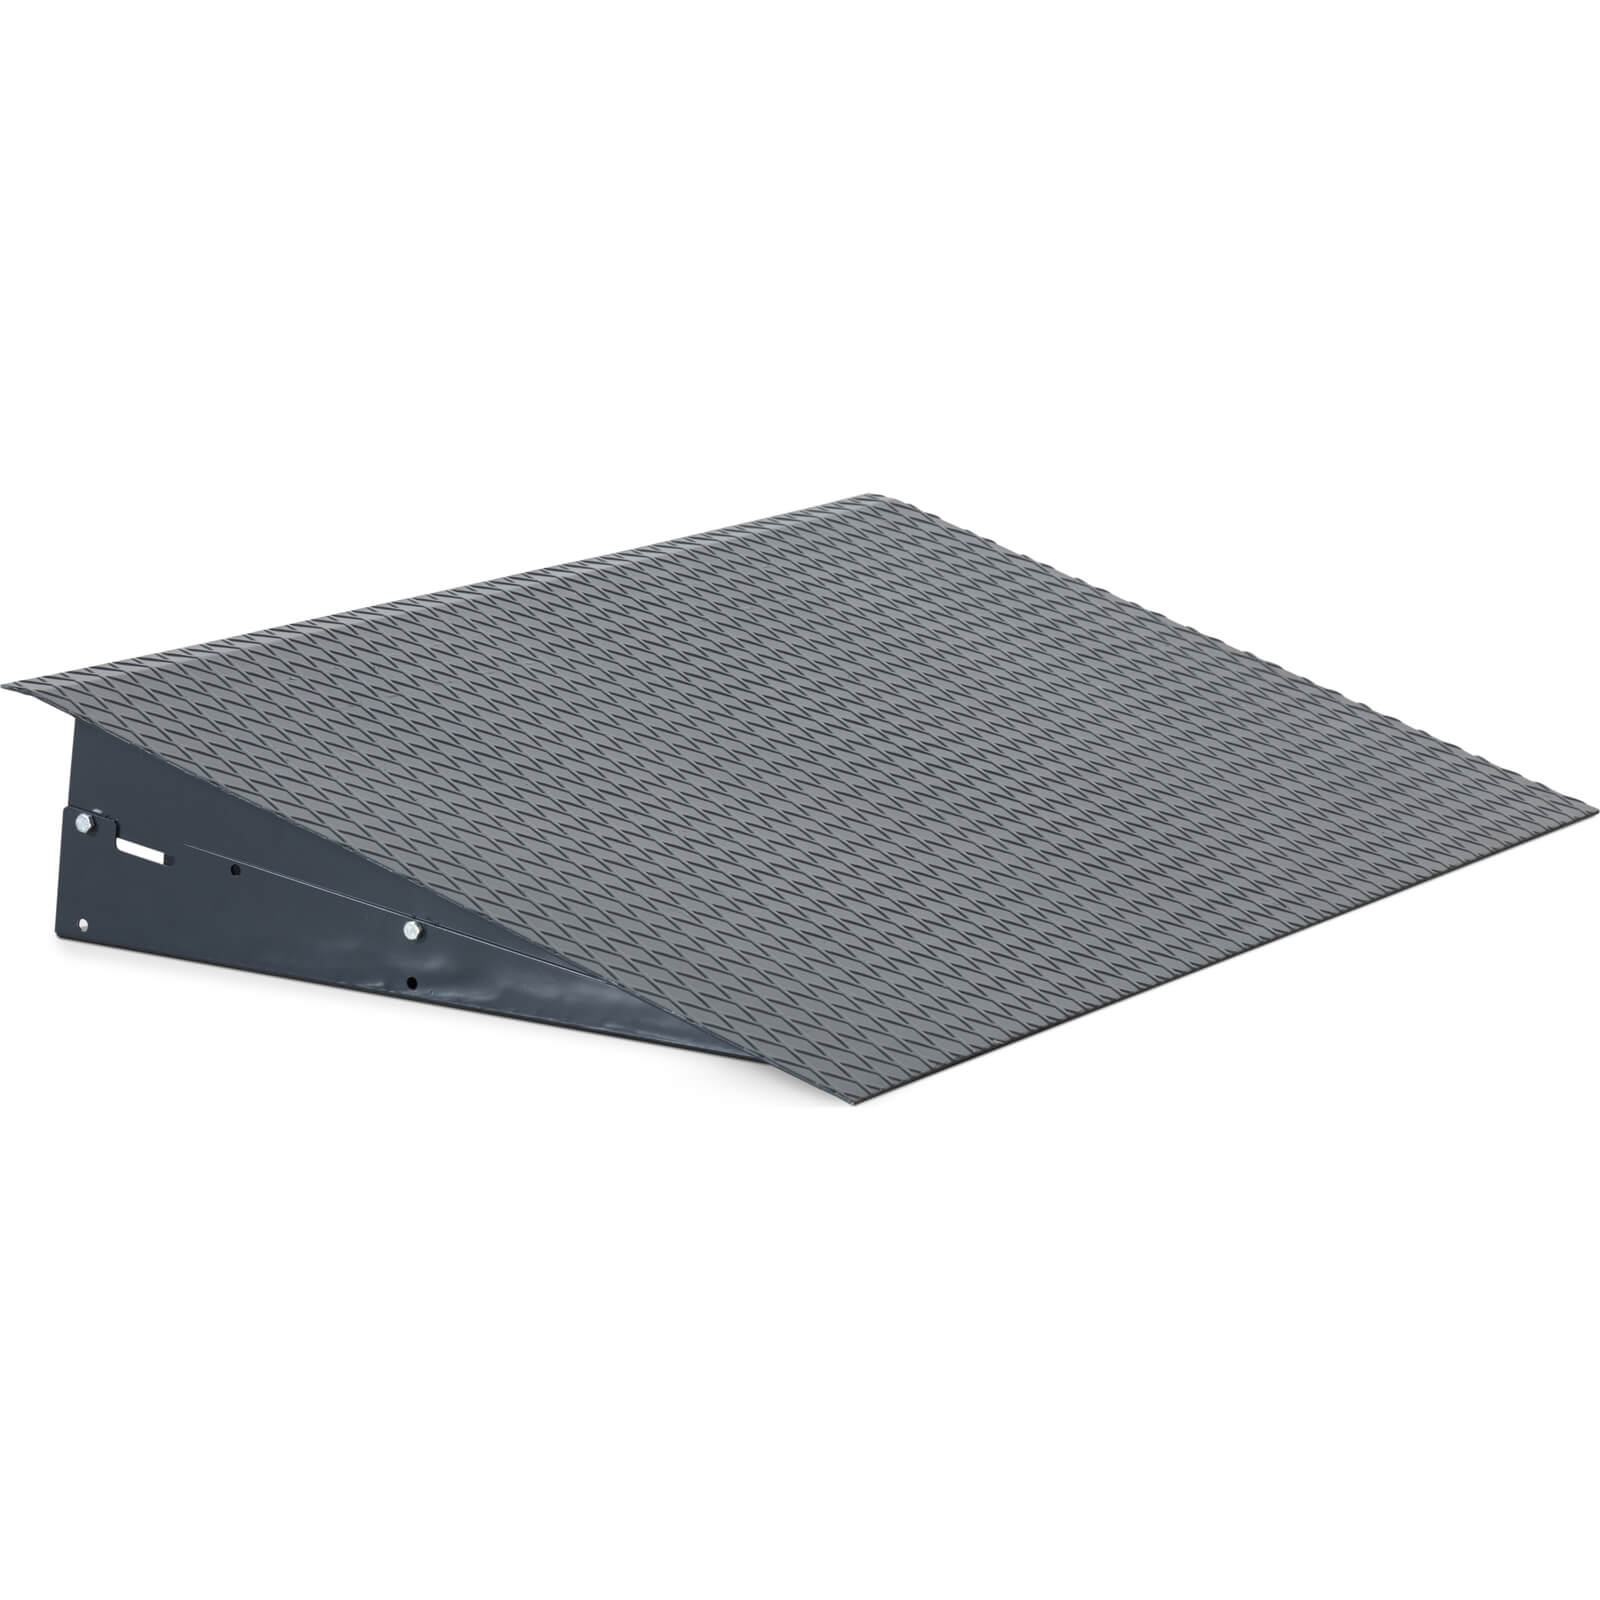 Armorgard Access Ramp for Forma-Stor Storage Units